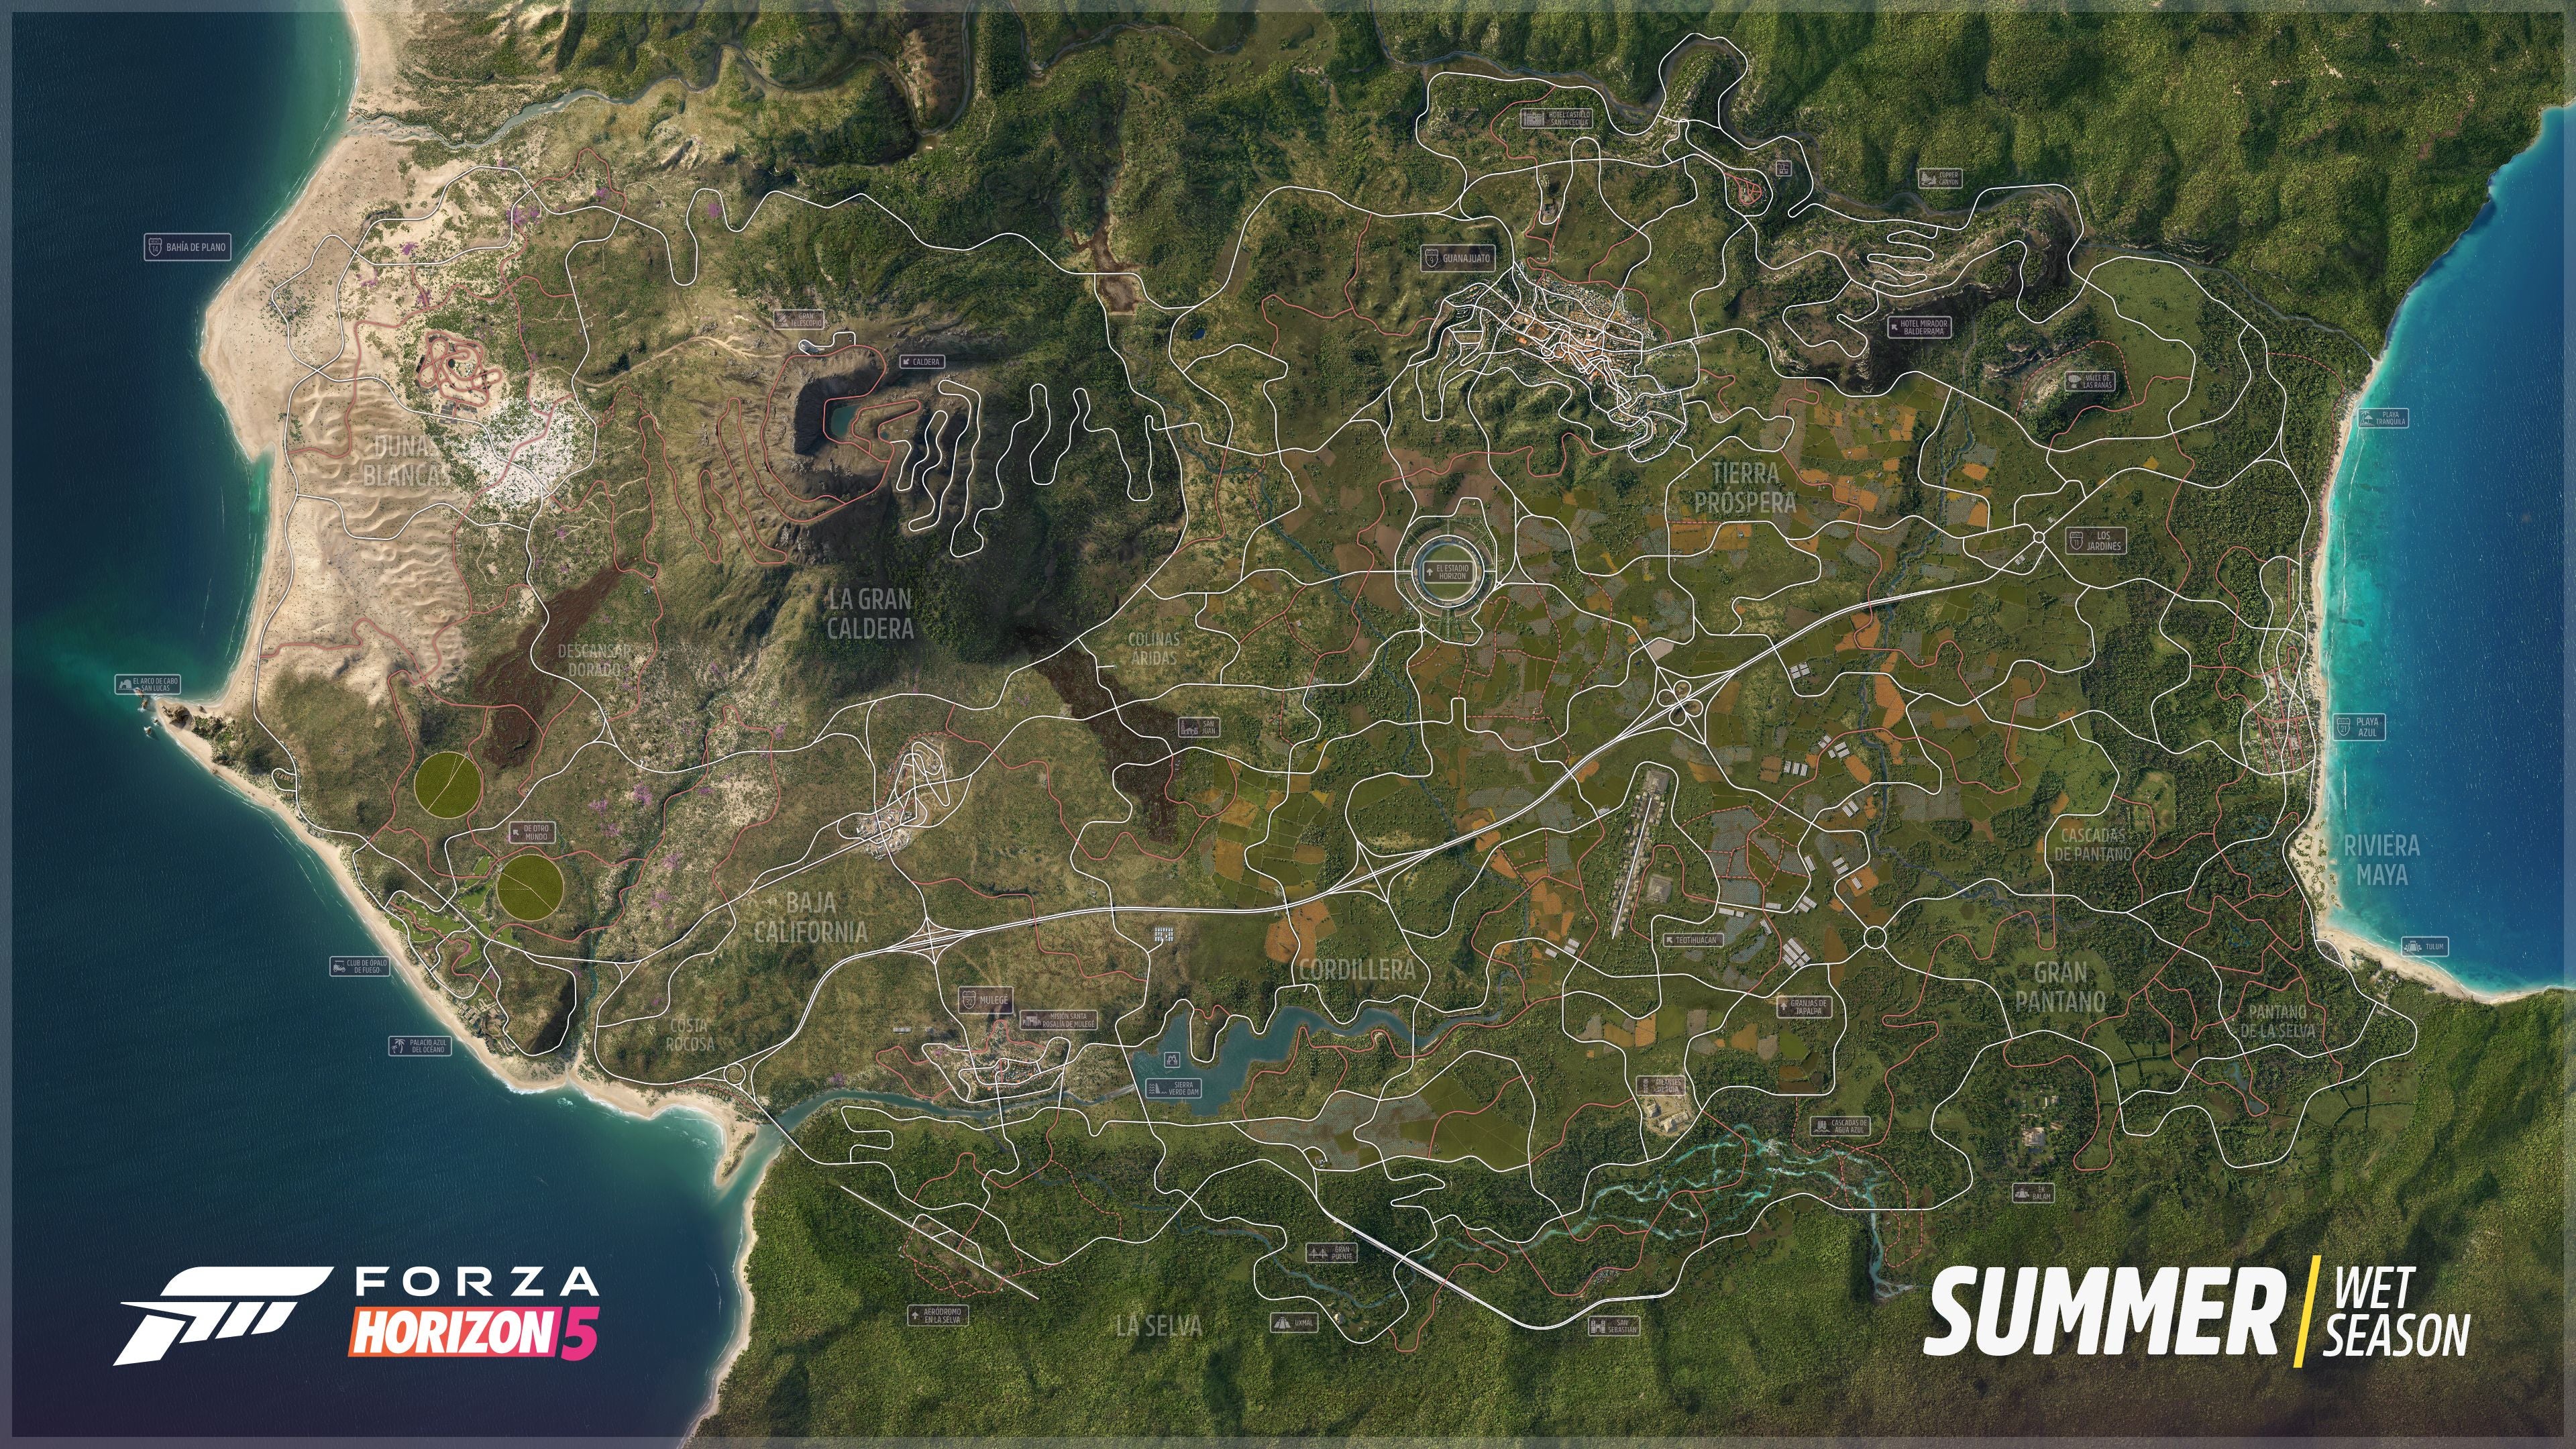 A top down view of Forza Horizon 5's entire map